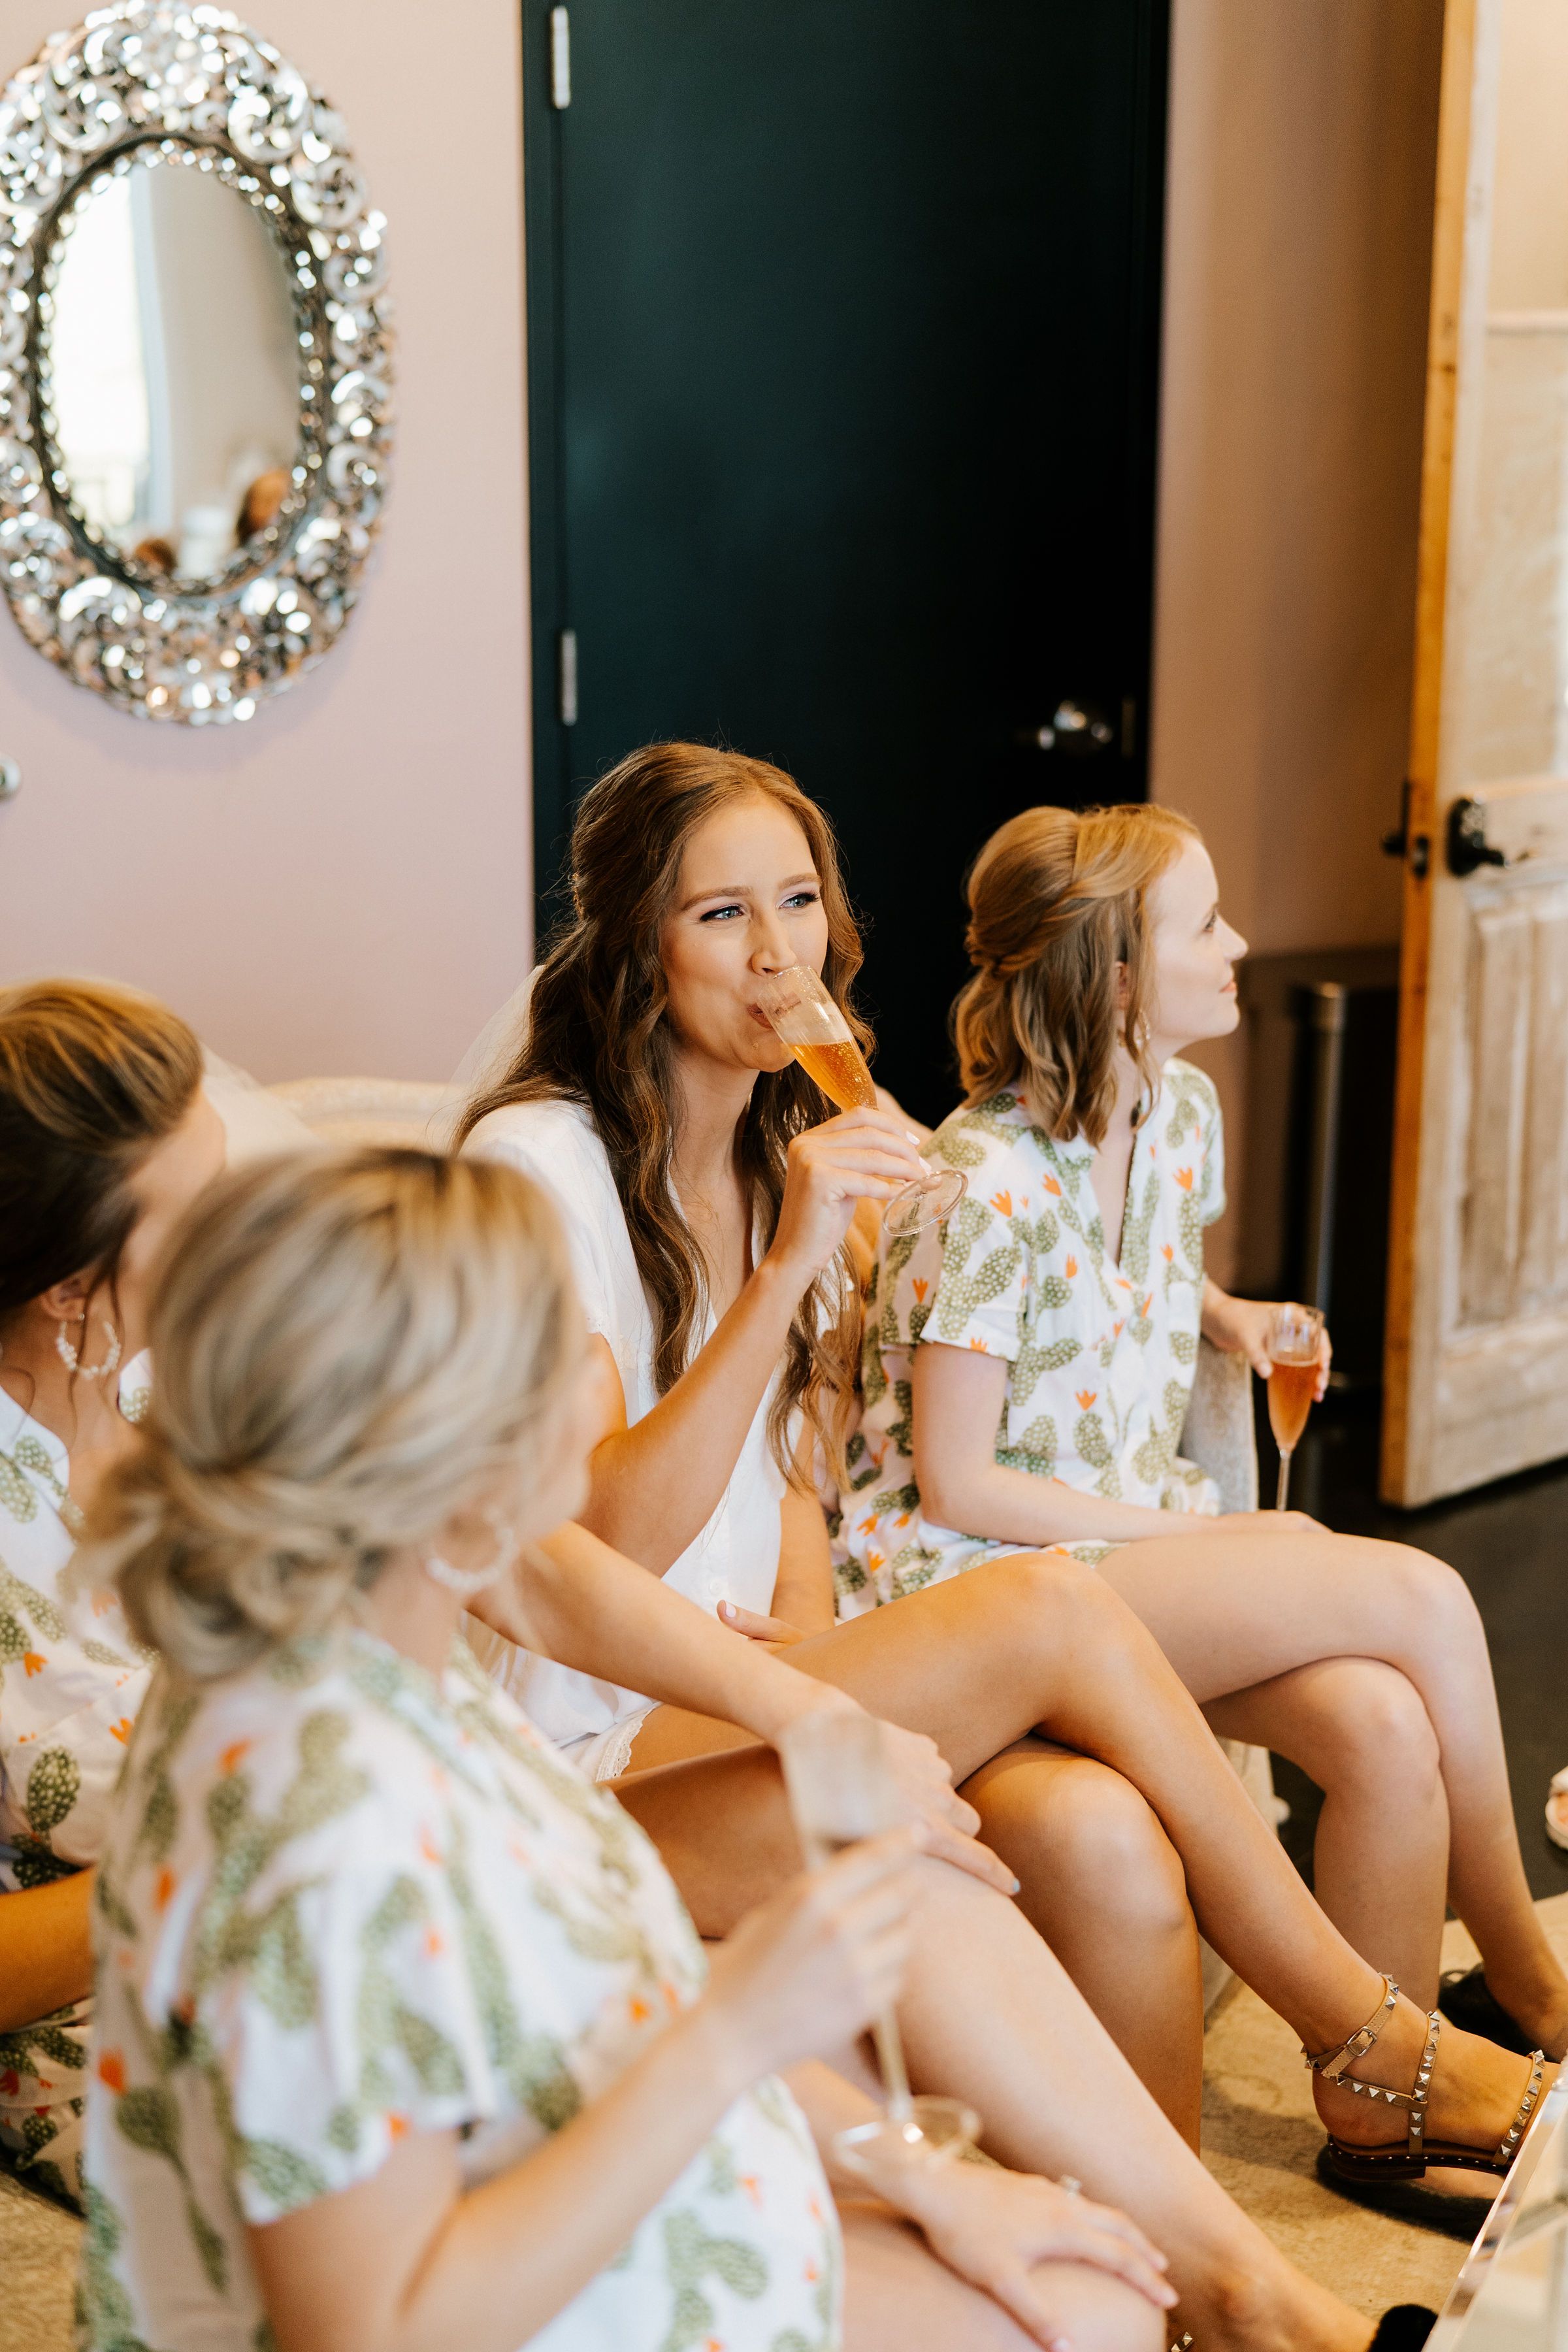 A bride to be sips champagne with her bridesmaids while getting ready before the wedding.